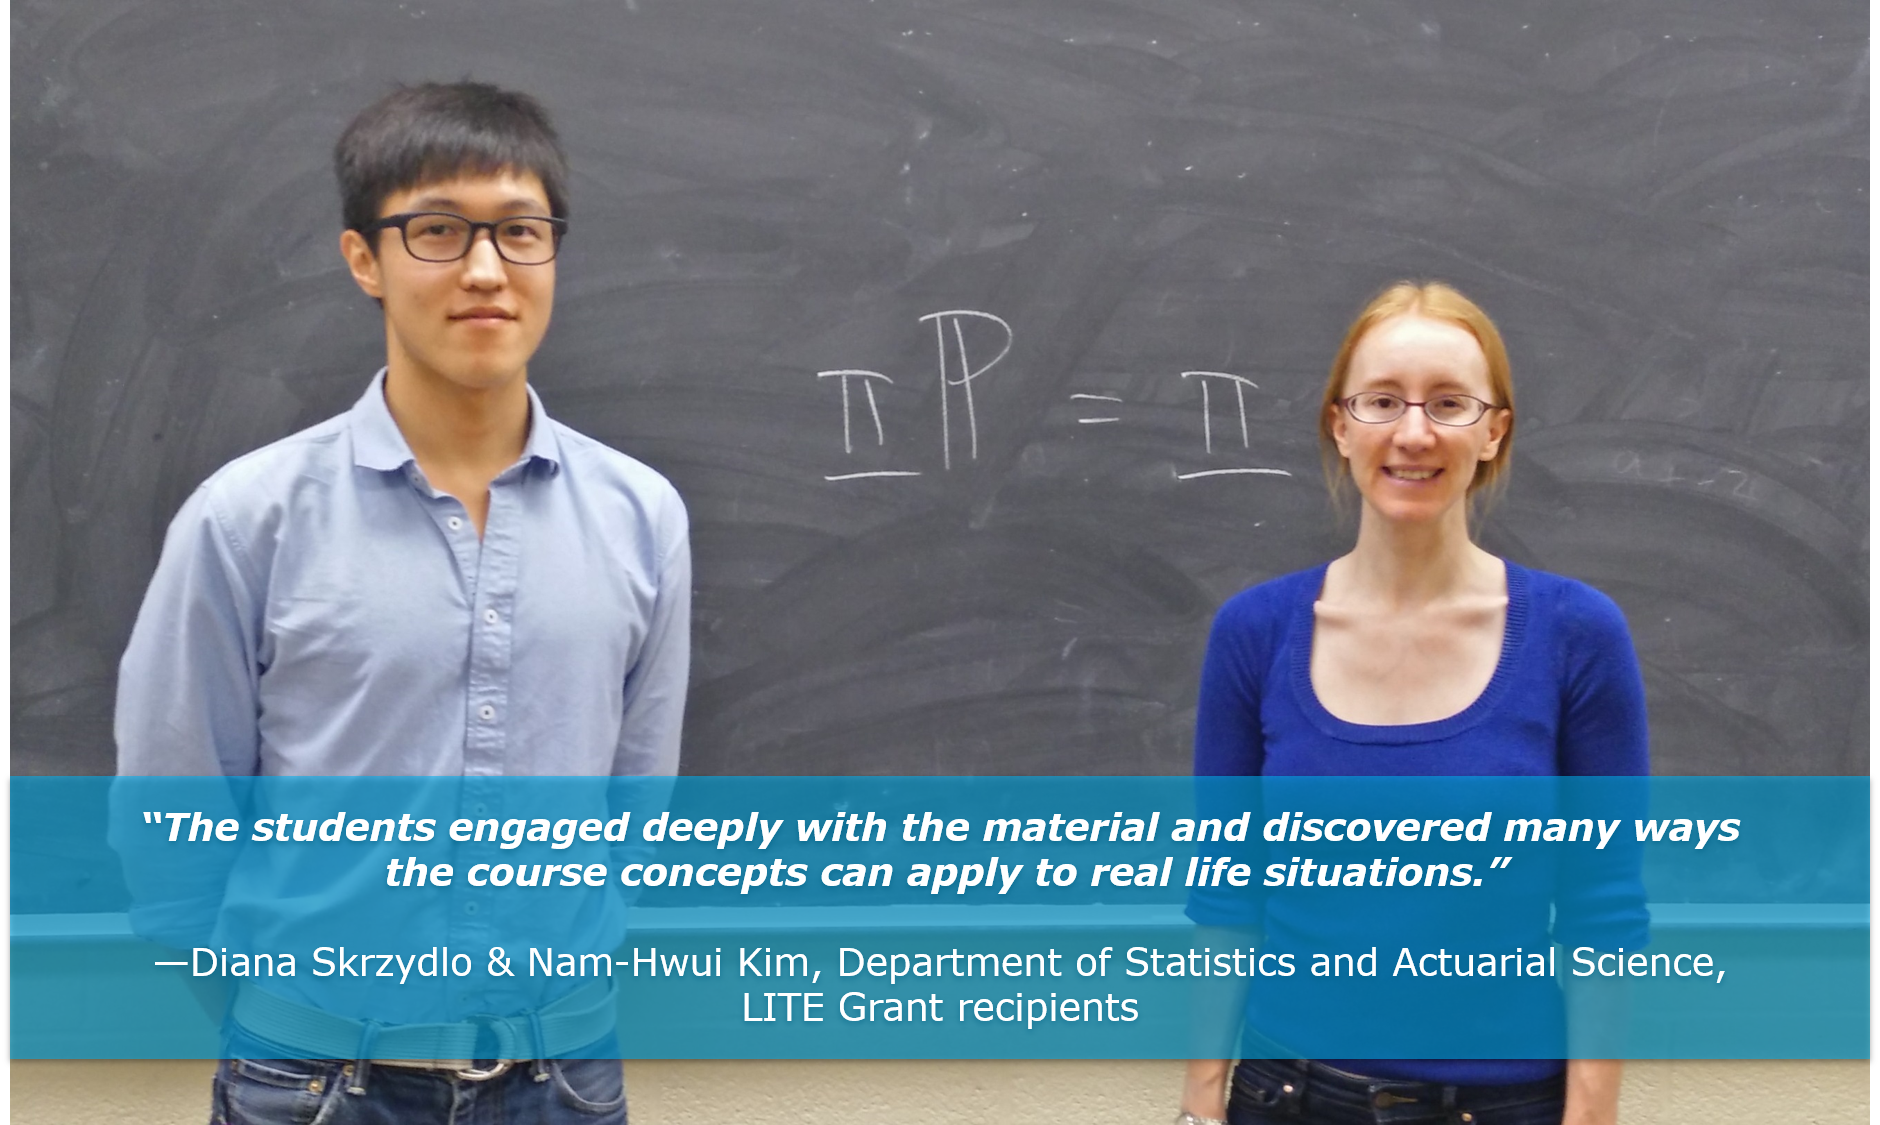 LITE recipient Diana Skrzydlo (Statistics & Actuarial Science) found interactive activities led to deeper learning